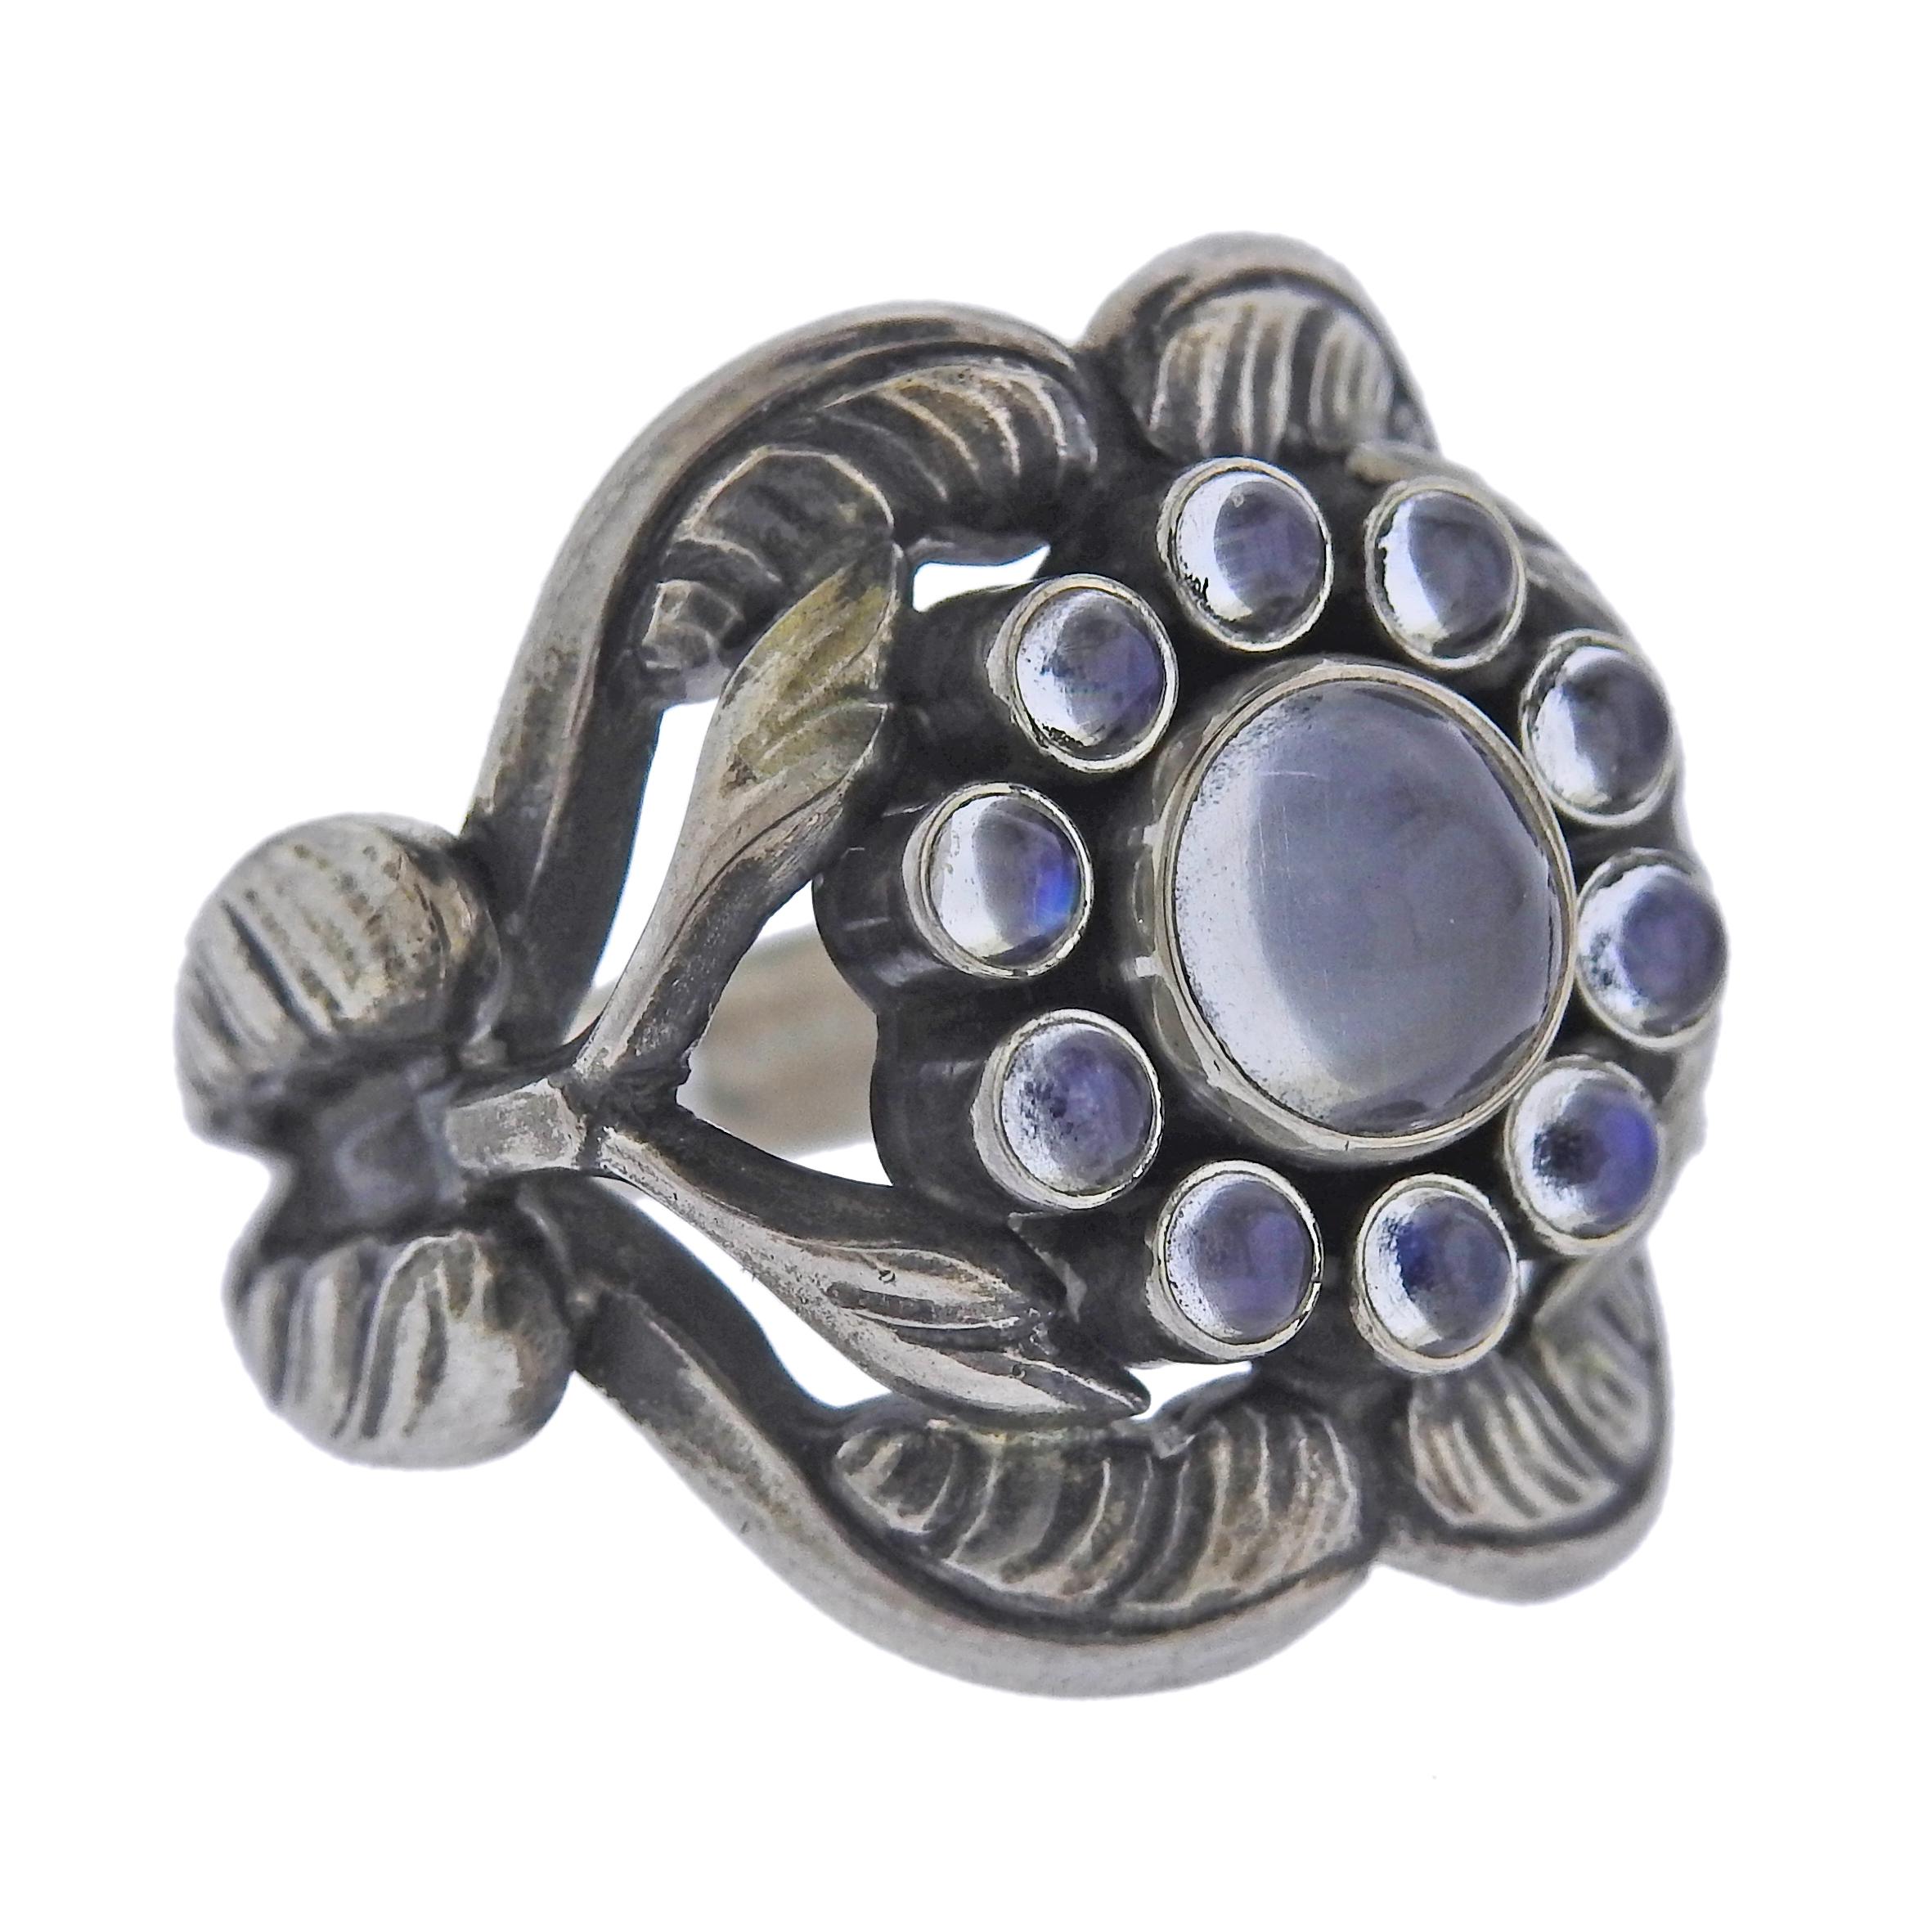 Brand new Georg Jensen sterling silver ring from Moonlight blossom collection, with moonstones.  Ring top is 21mm wide. Available in sizes : 54; 55. Model #3550260. Marked: GJ mark, 925 S, 10 Weight - 9.1 grams.